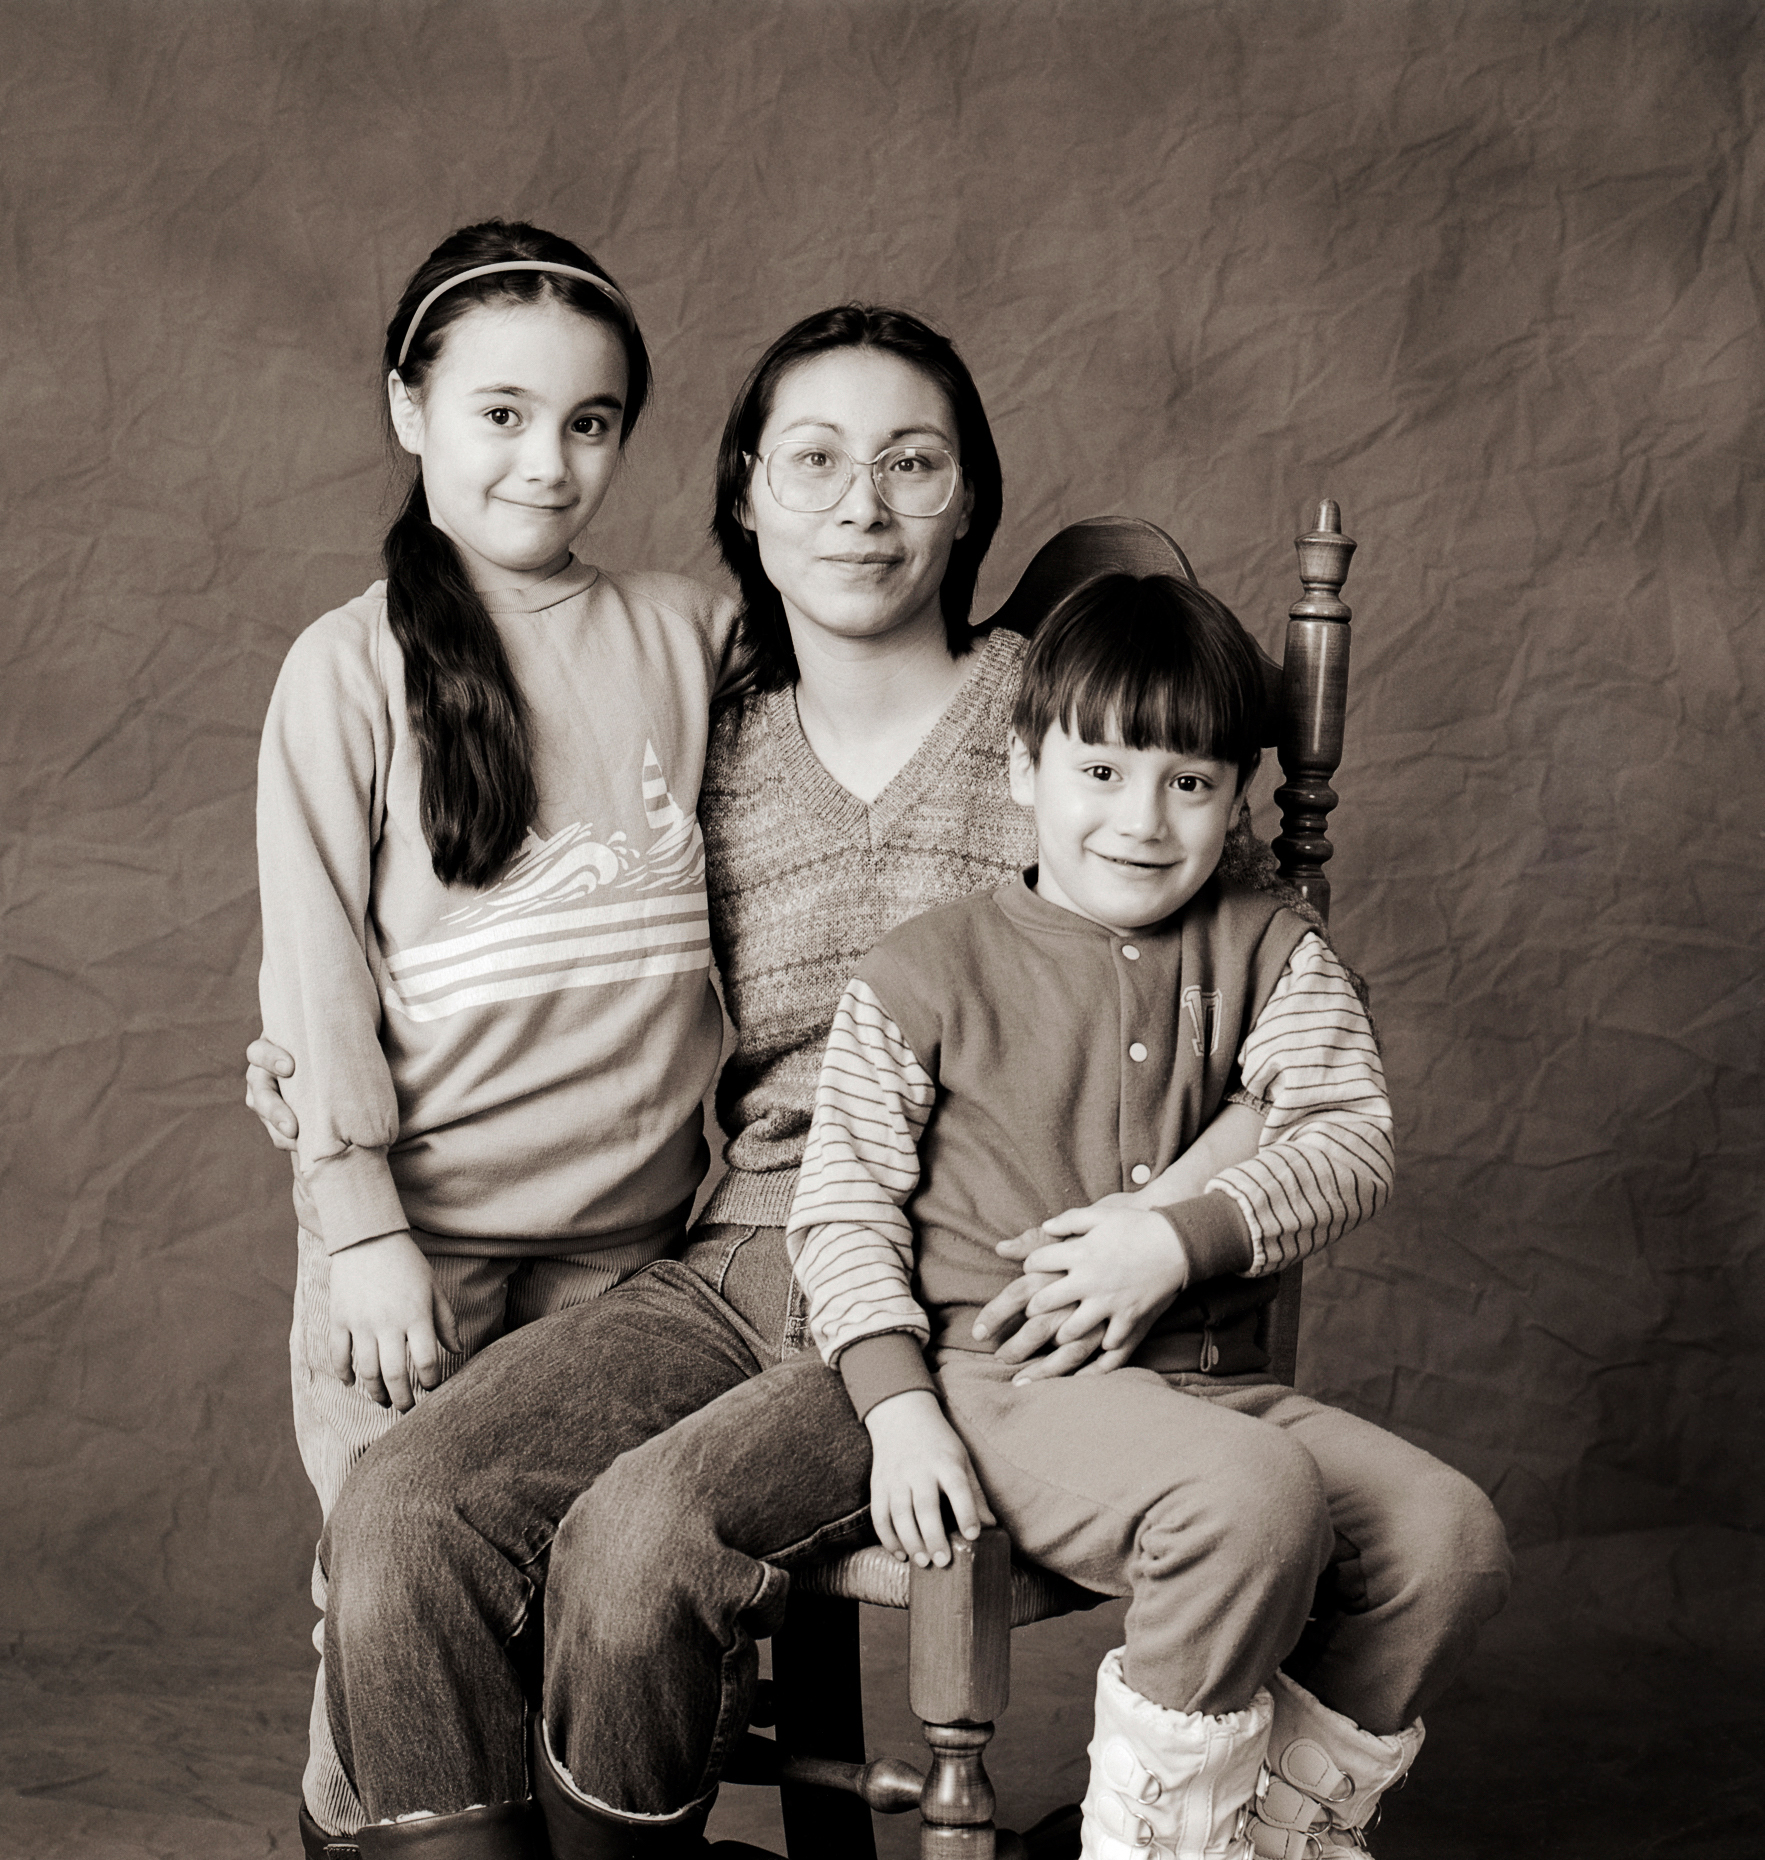 Black & white studio portrait of Inuit woman and her two children in a photography studio in Iqaluit, Nunavut, Canada